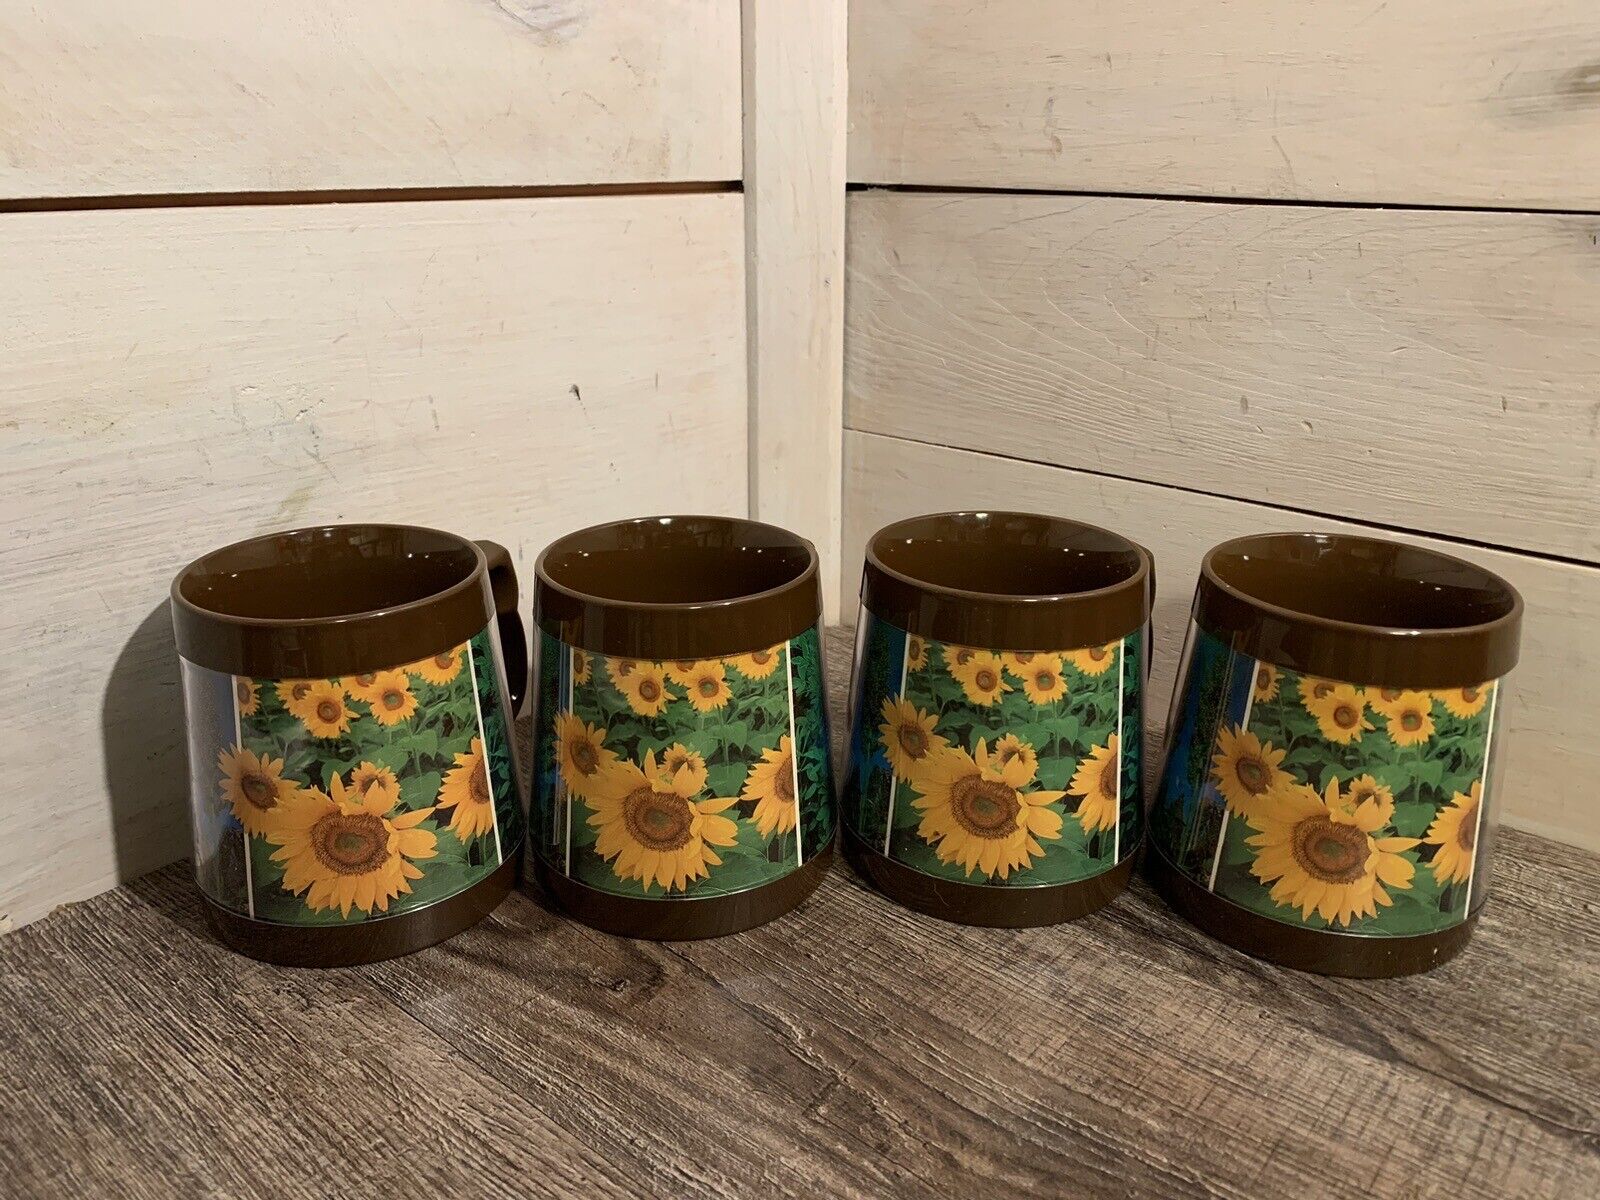 Vtg Thermo Serve Cup Mug  Sunflowers  Insulated Lot 4 Cups Mugs Coffee